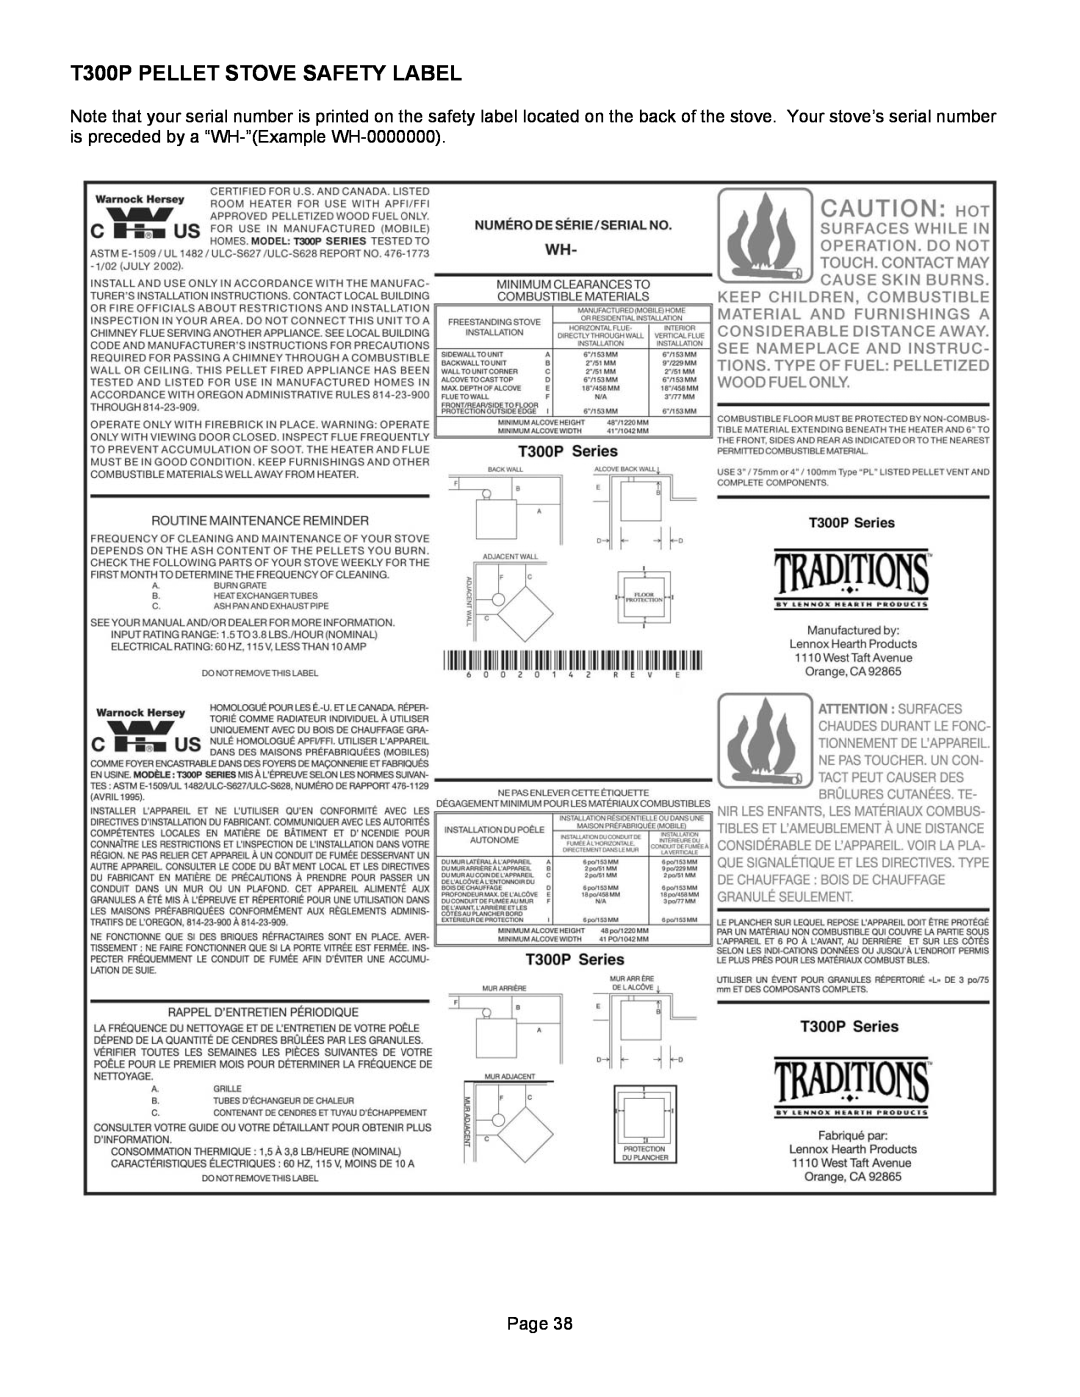 Lennox Hearth operation manual T300P PELLET STOVE SAFETY LABEL, Page 